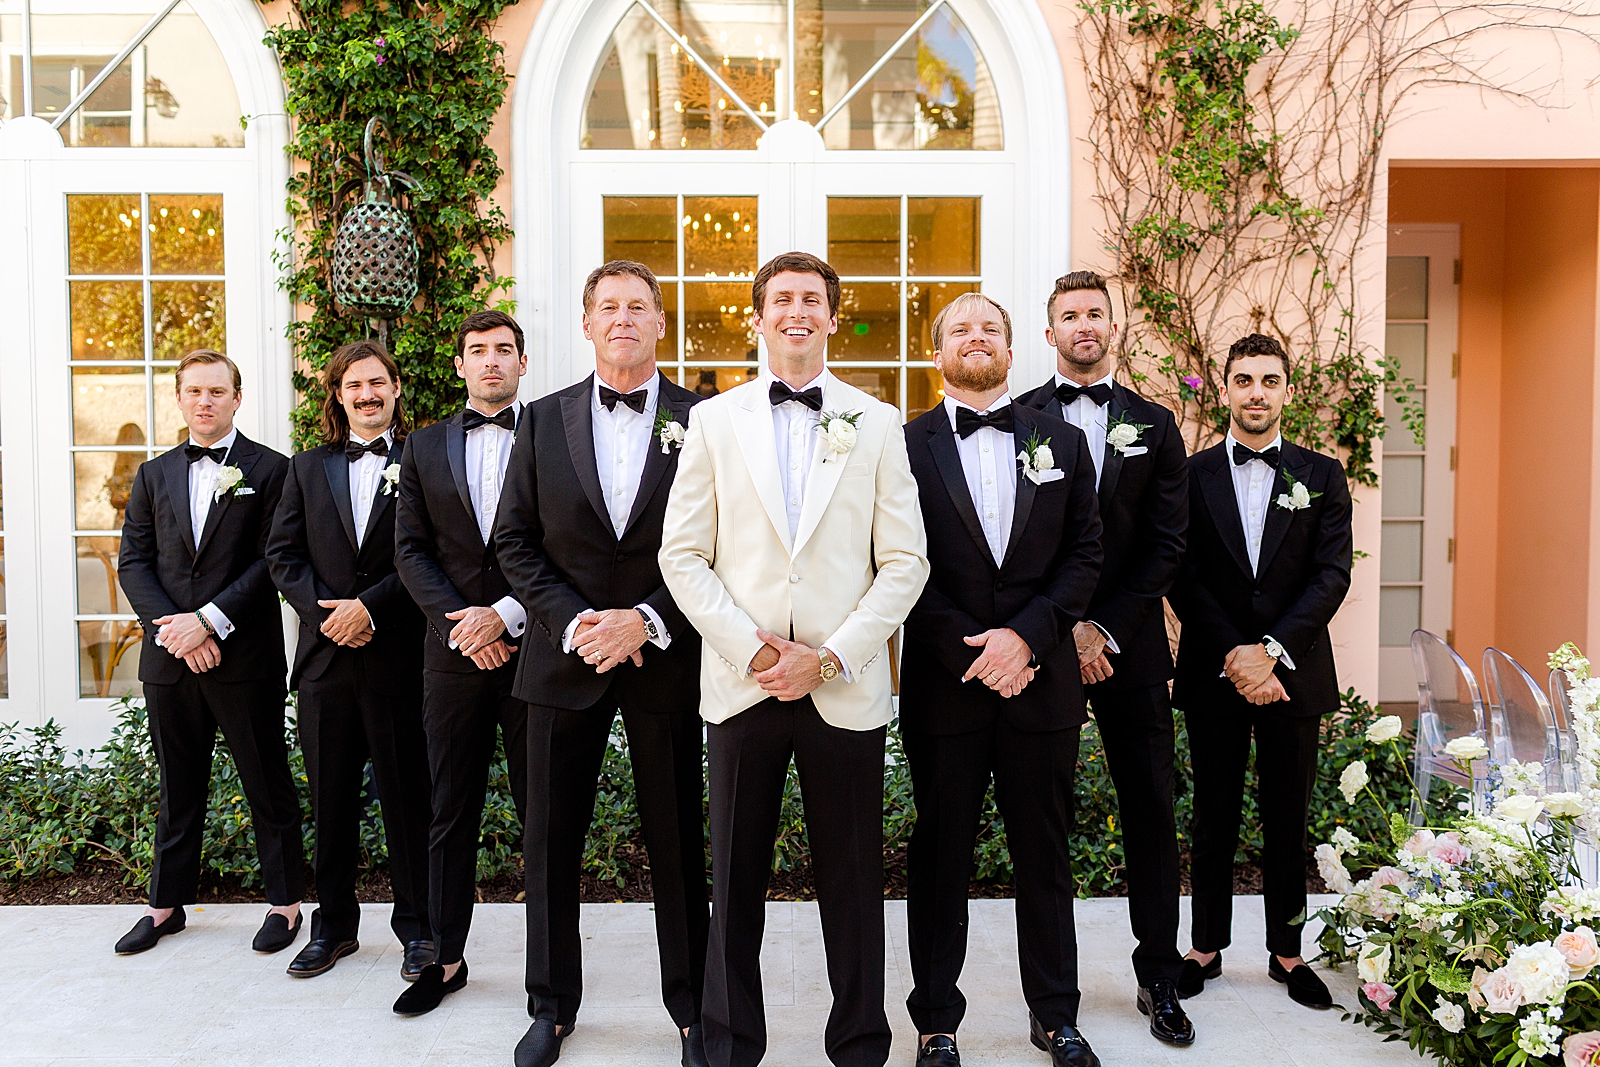 Groom wearing white jacket in formation with Groomsmen in triangle position